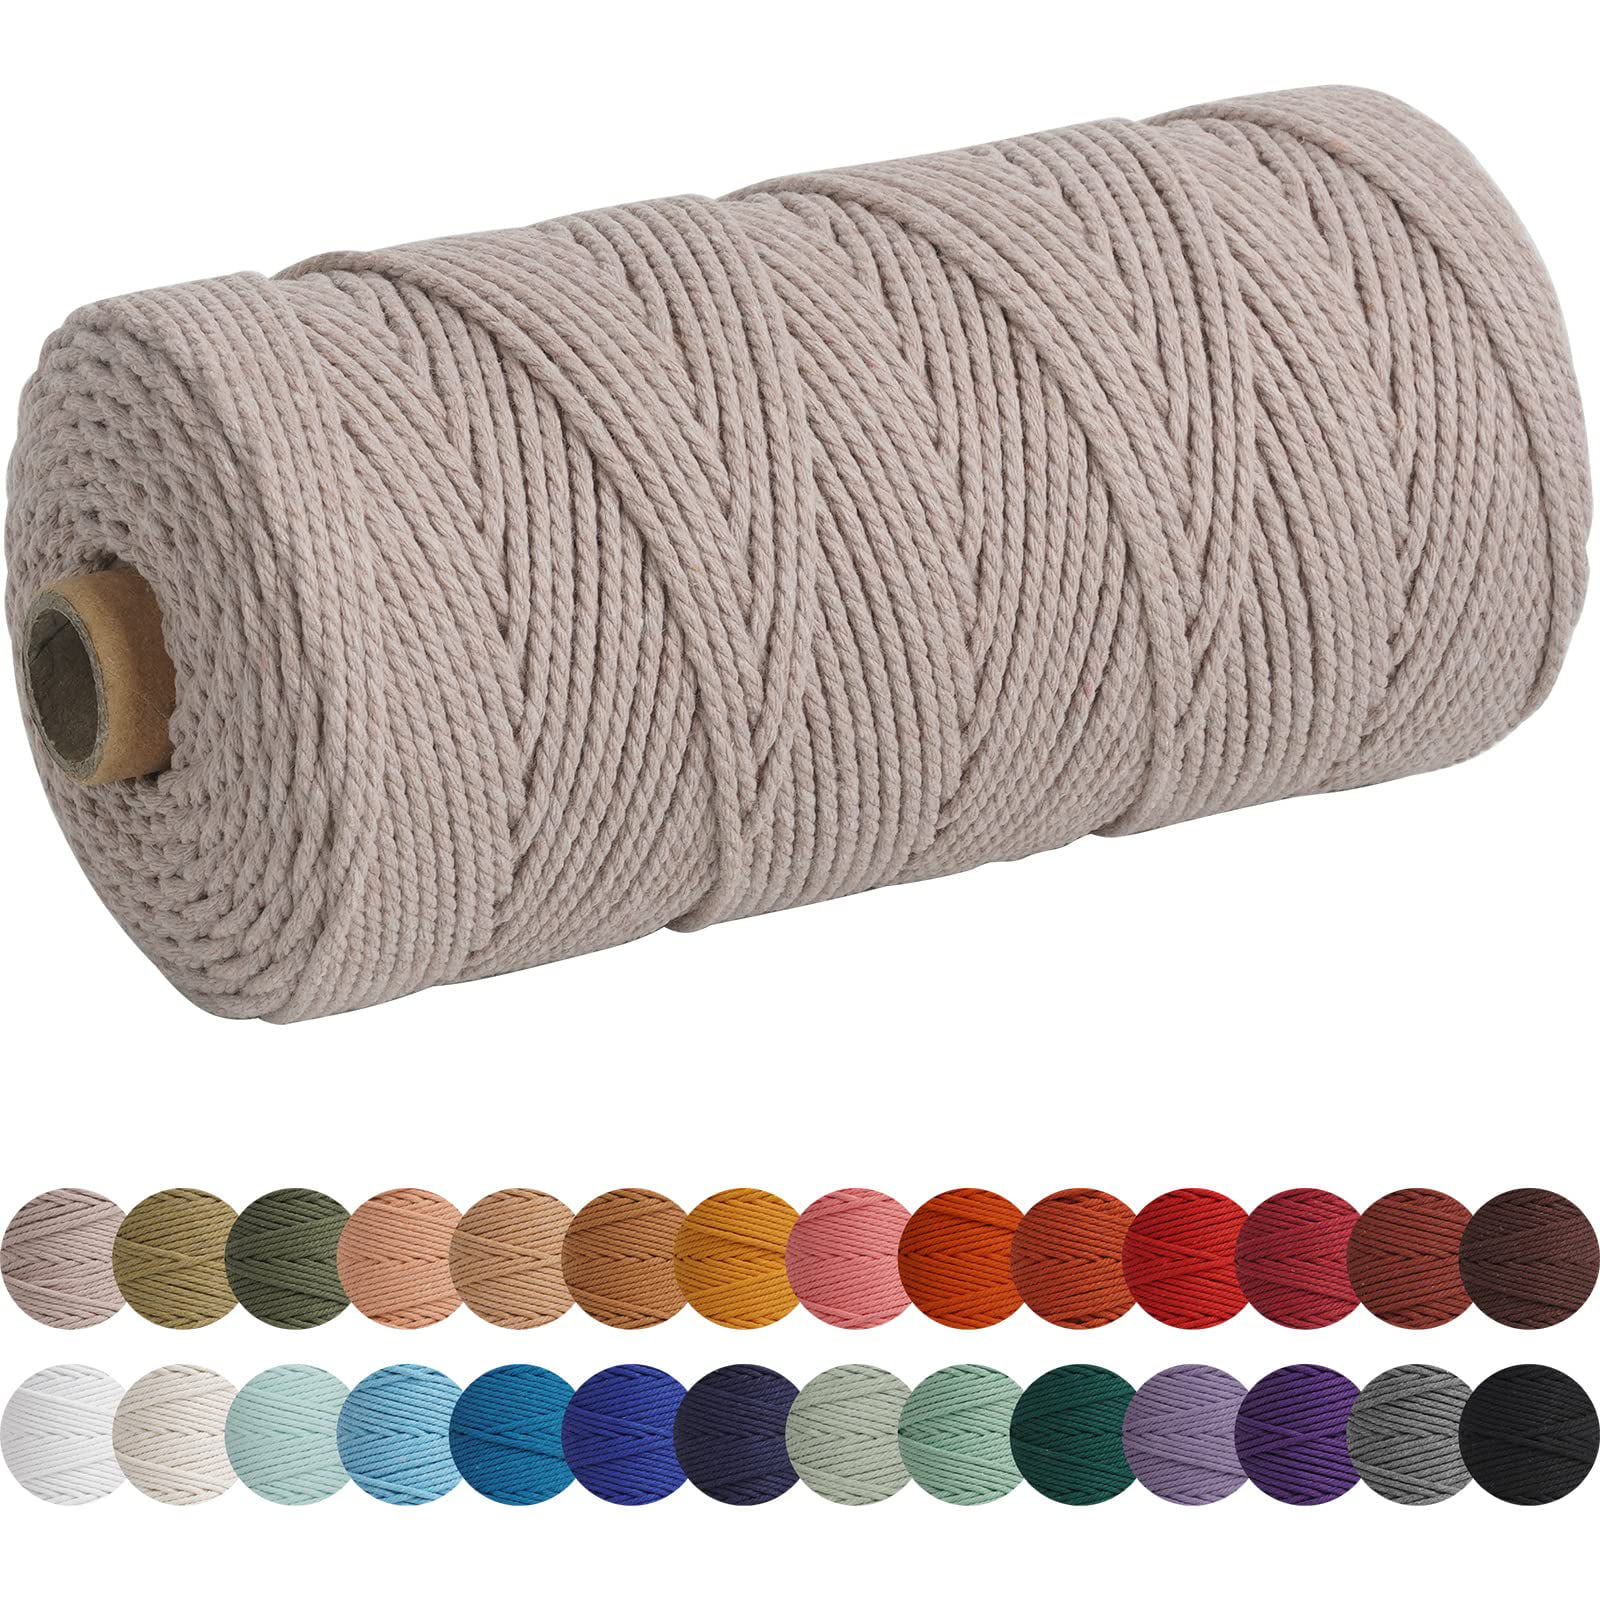 Macrame Cotton Cord 2mm 109 Yard Cotton Rope Colored Craft Cord for DIY Crafts Plant Hangers Dark Green 